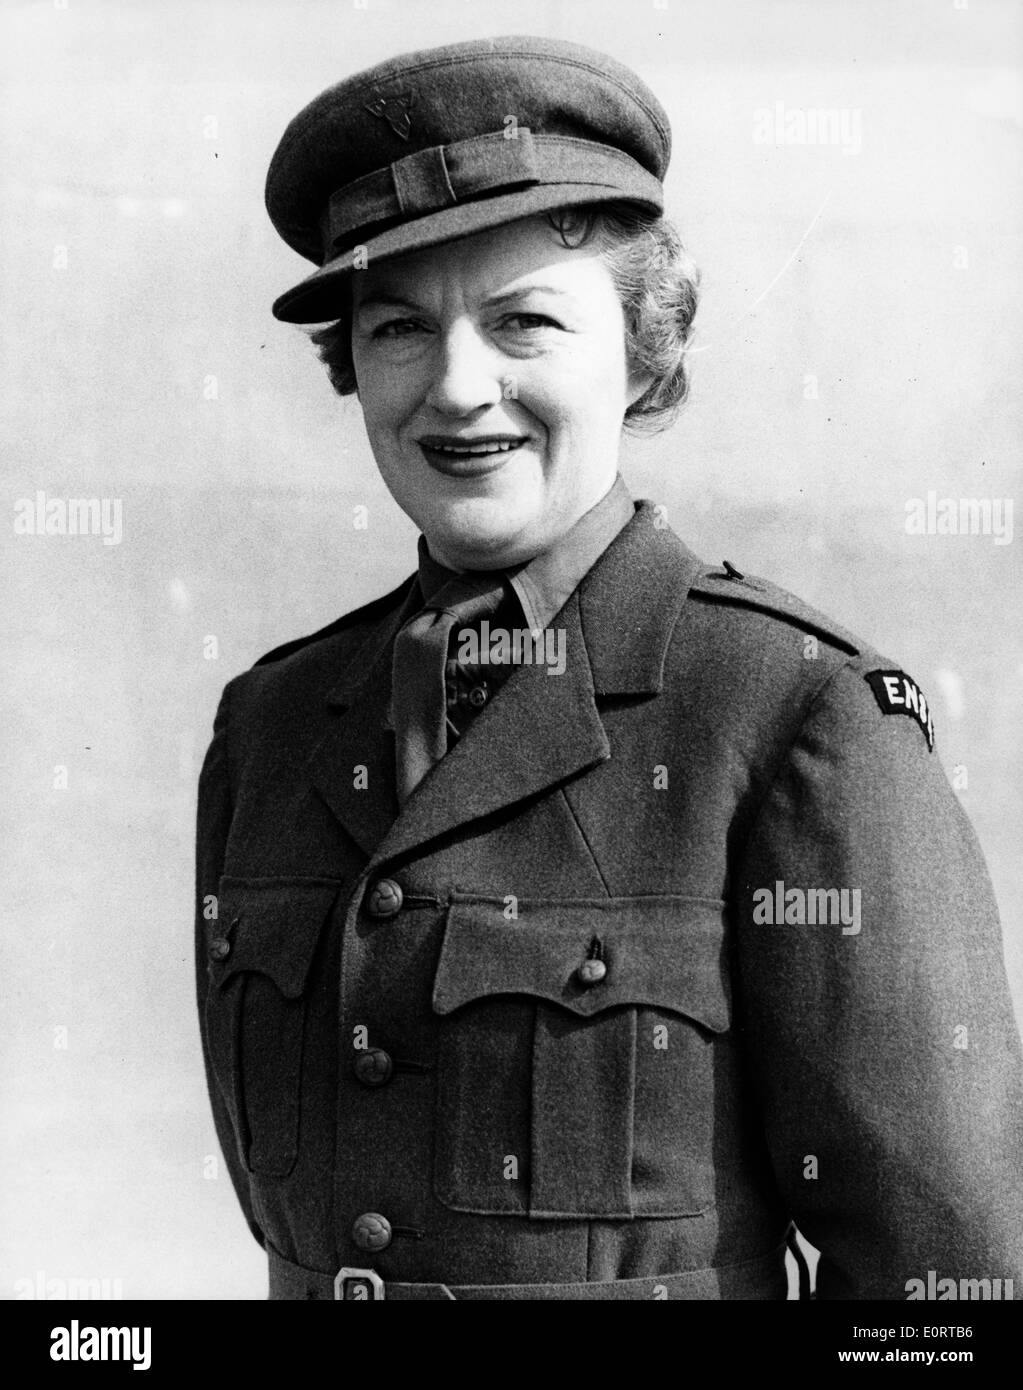 Actress Gracie Fields in military uniform Stock Photo